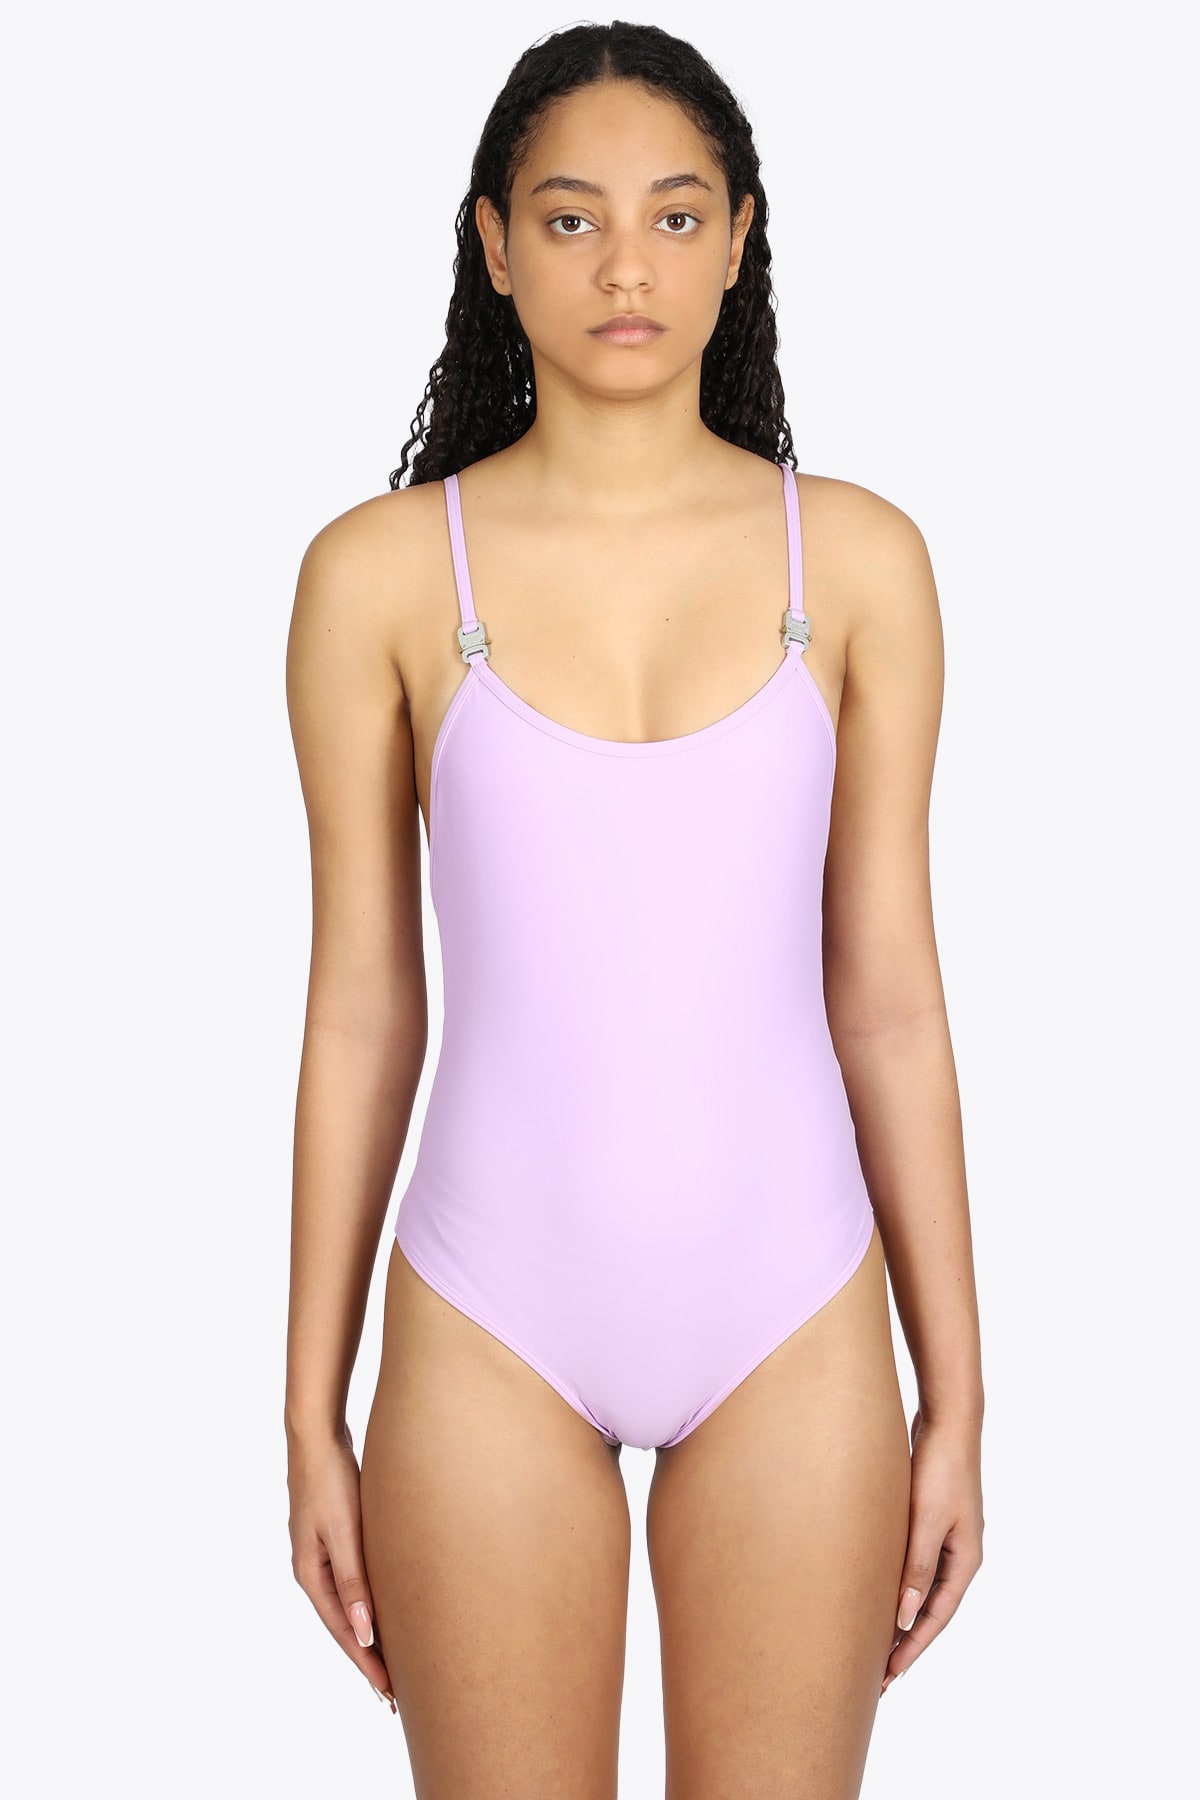 1017 ALYX 9SM Susyn Bathing Suit Lilac lycra bathing suit with buckles - Susyn